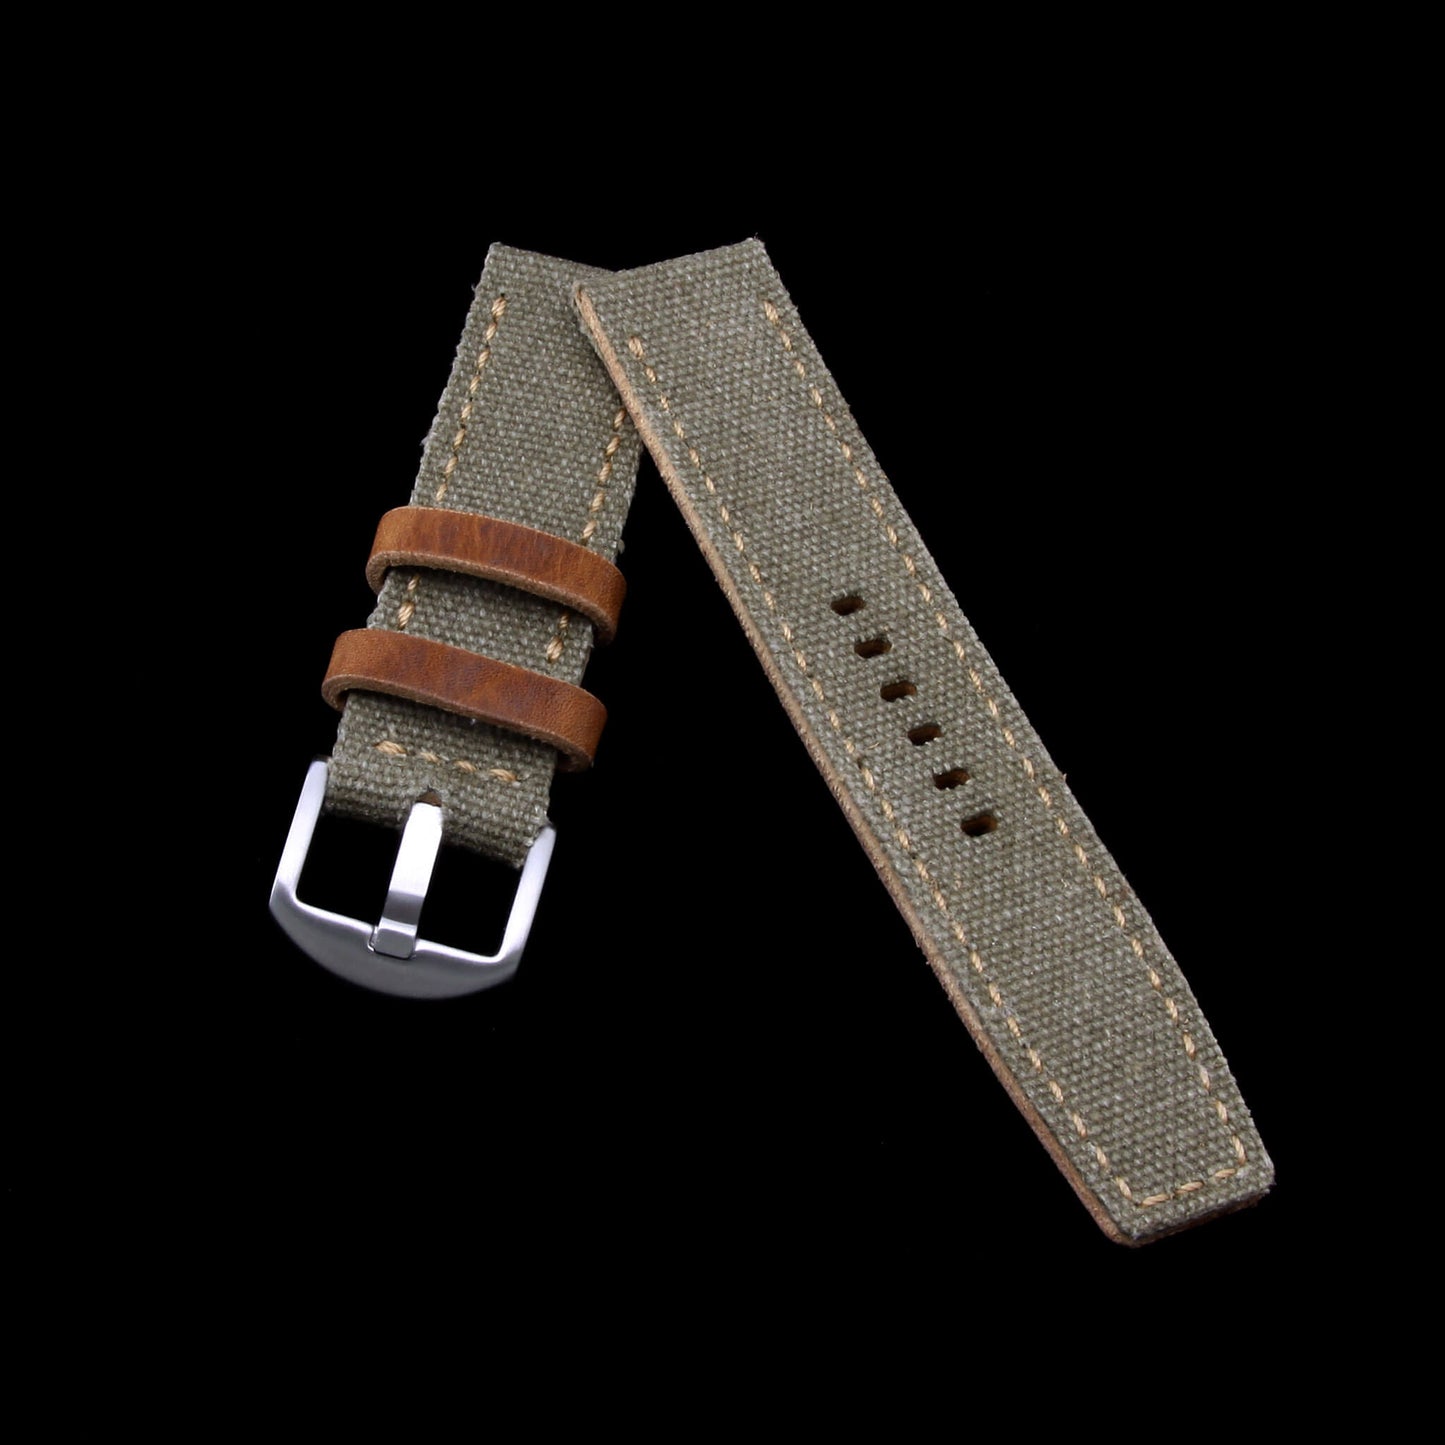 2-Piece Full Stitch Leather Watch Strap, made with Military Green Canvas and Italian veg-tanned leather lining, handcrafted by Cozy Handmade